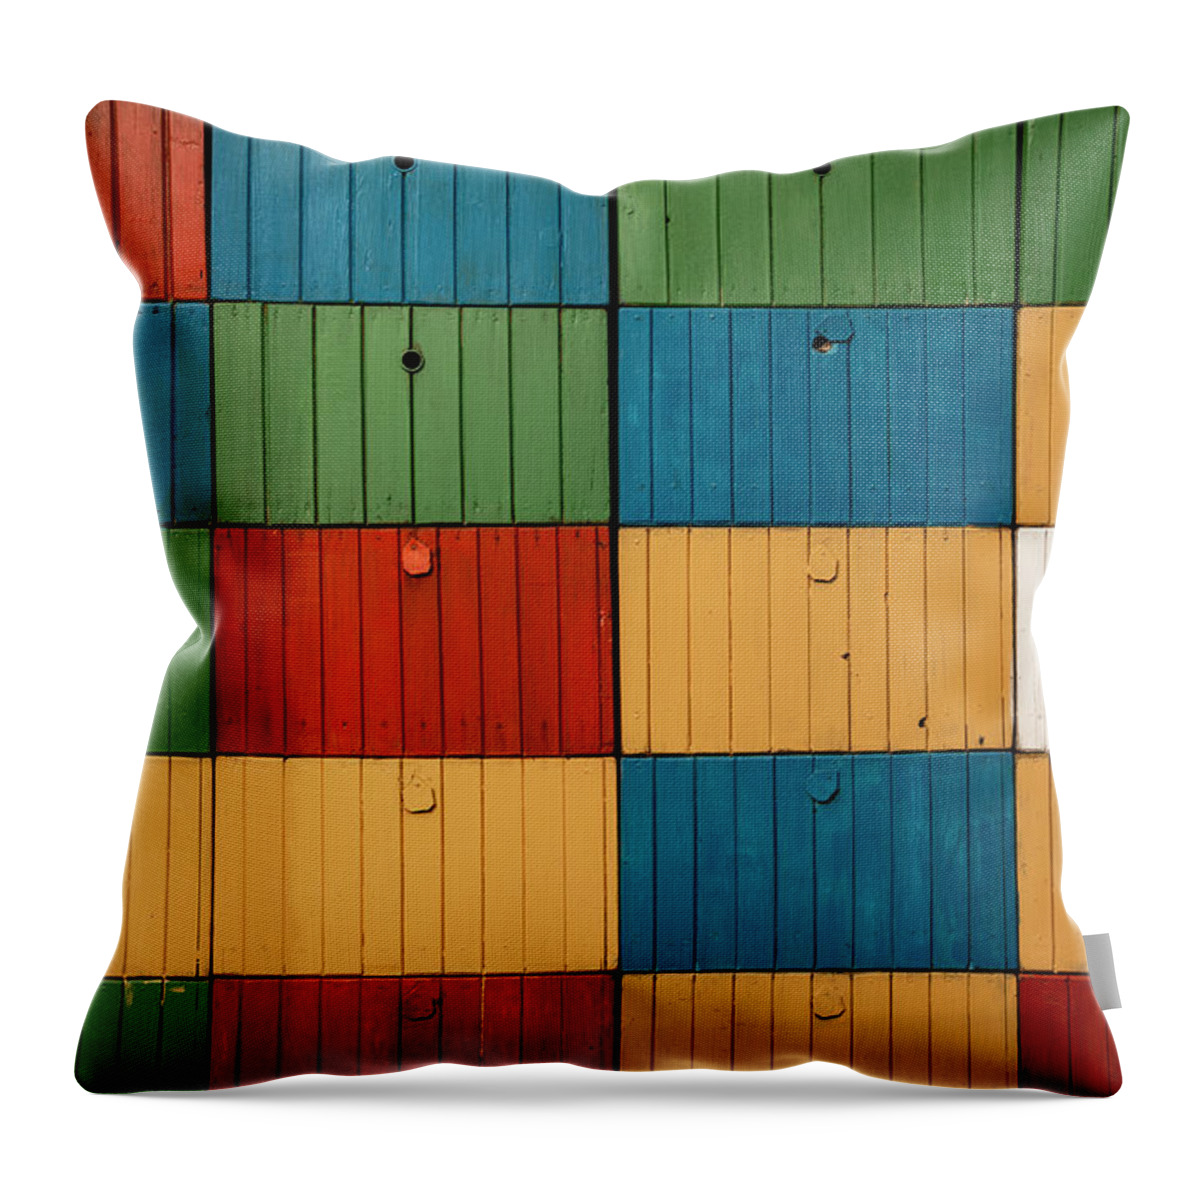 Colorful Throw Pillow featuring the photograph Colorful Beehives - Fine Art Photography Print by Martin Vorel Minimalist Photography